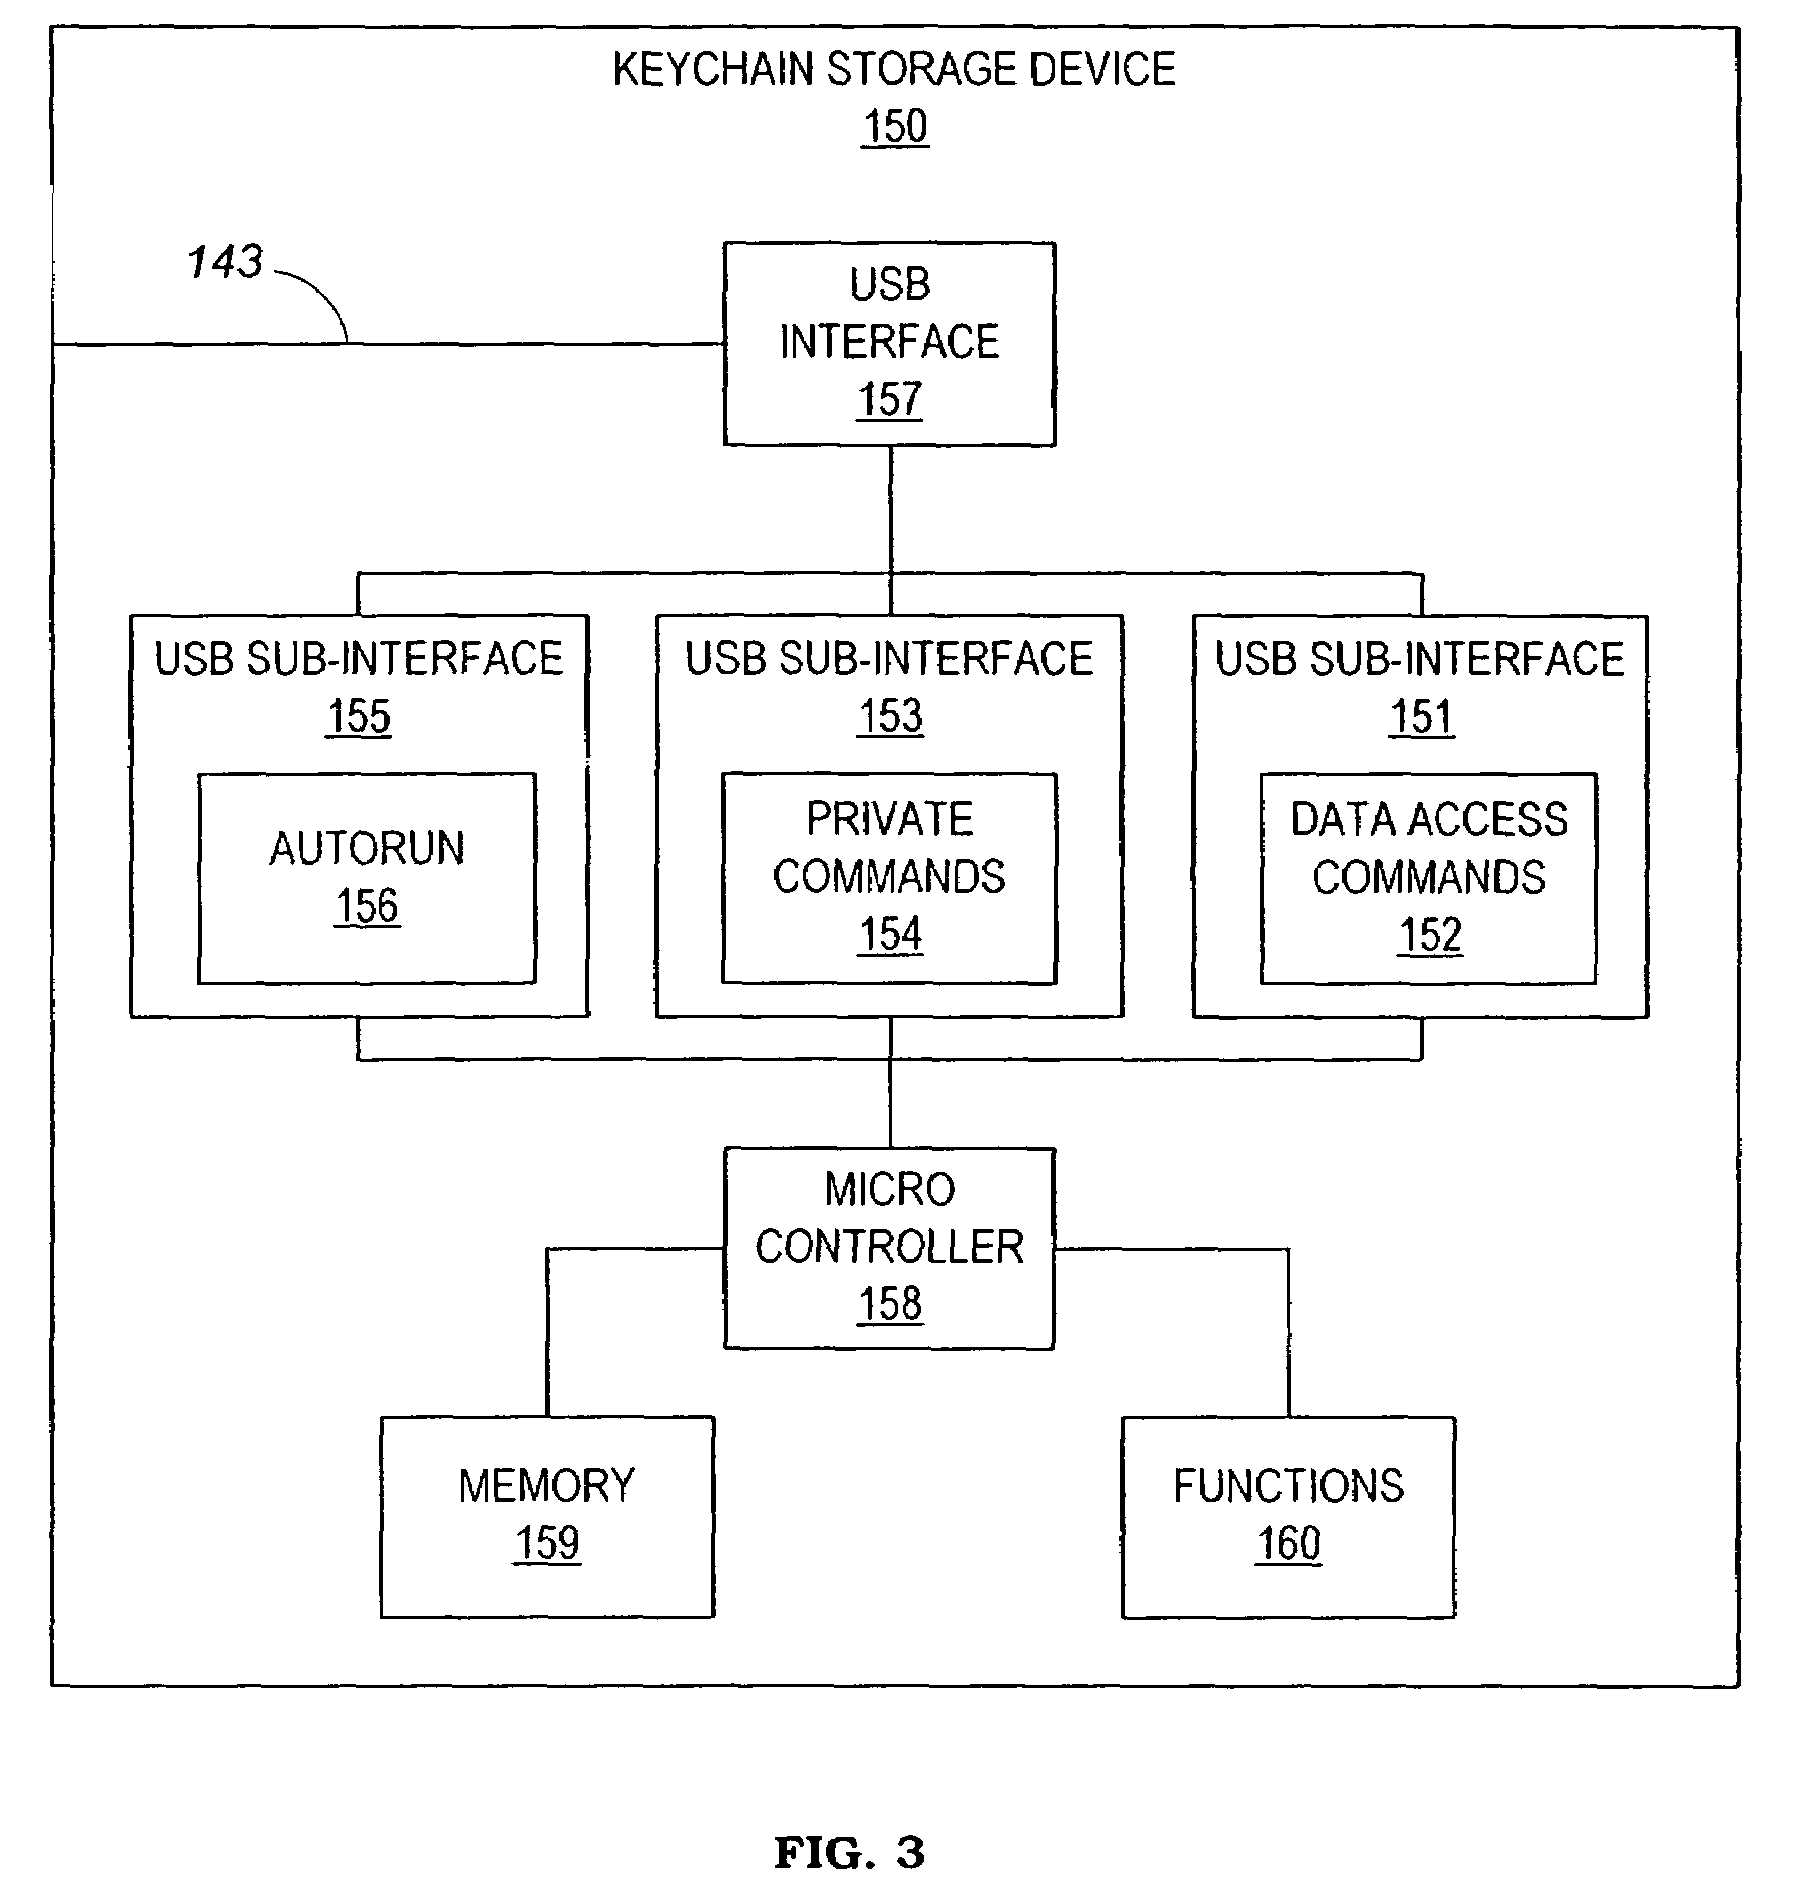 Data storage device with full access by all users